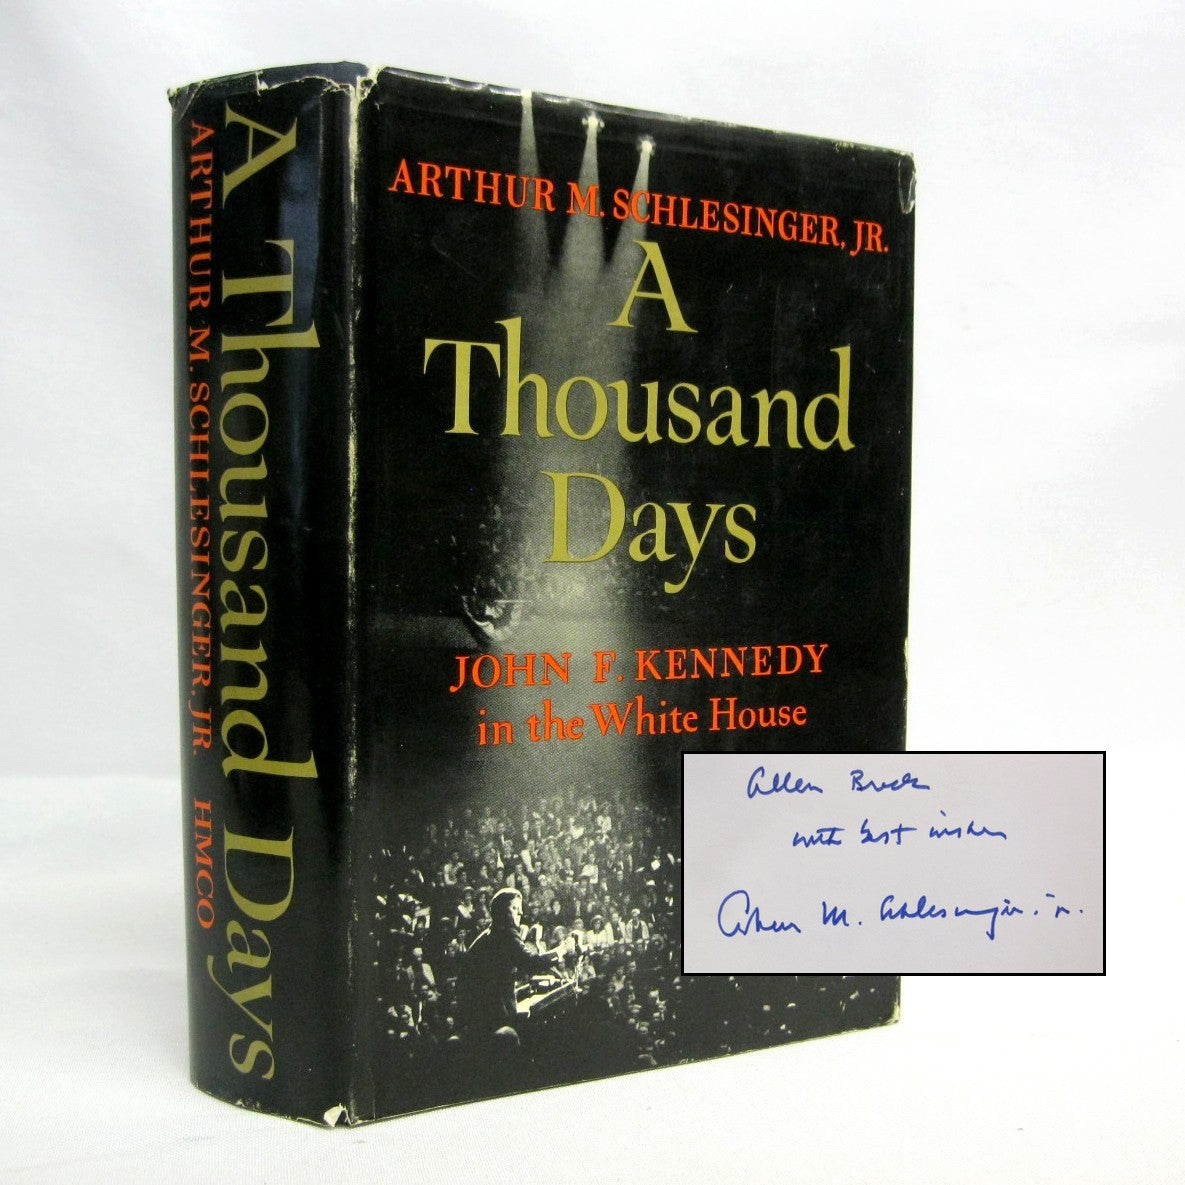 A Thousand Days: John F Kennedy in the White House by Arthur M. Schlesinger, Jr.